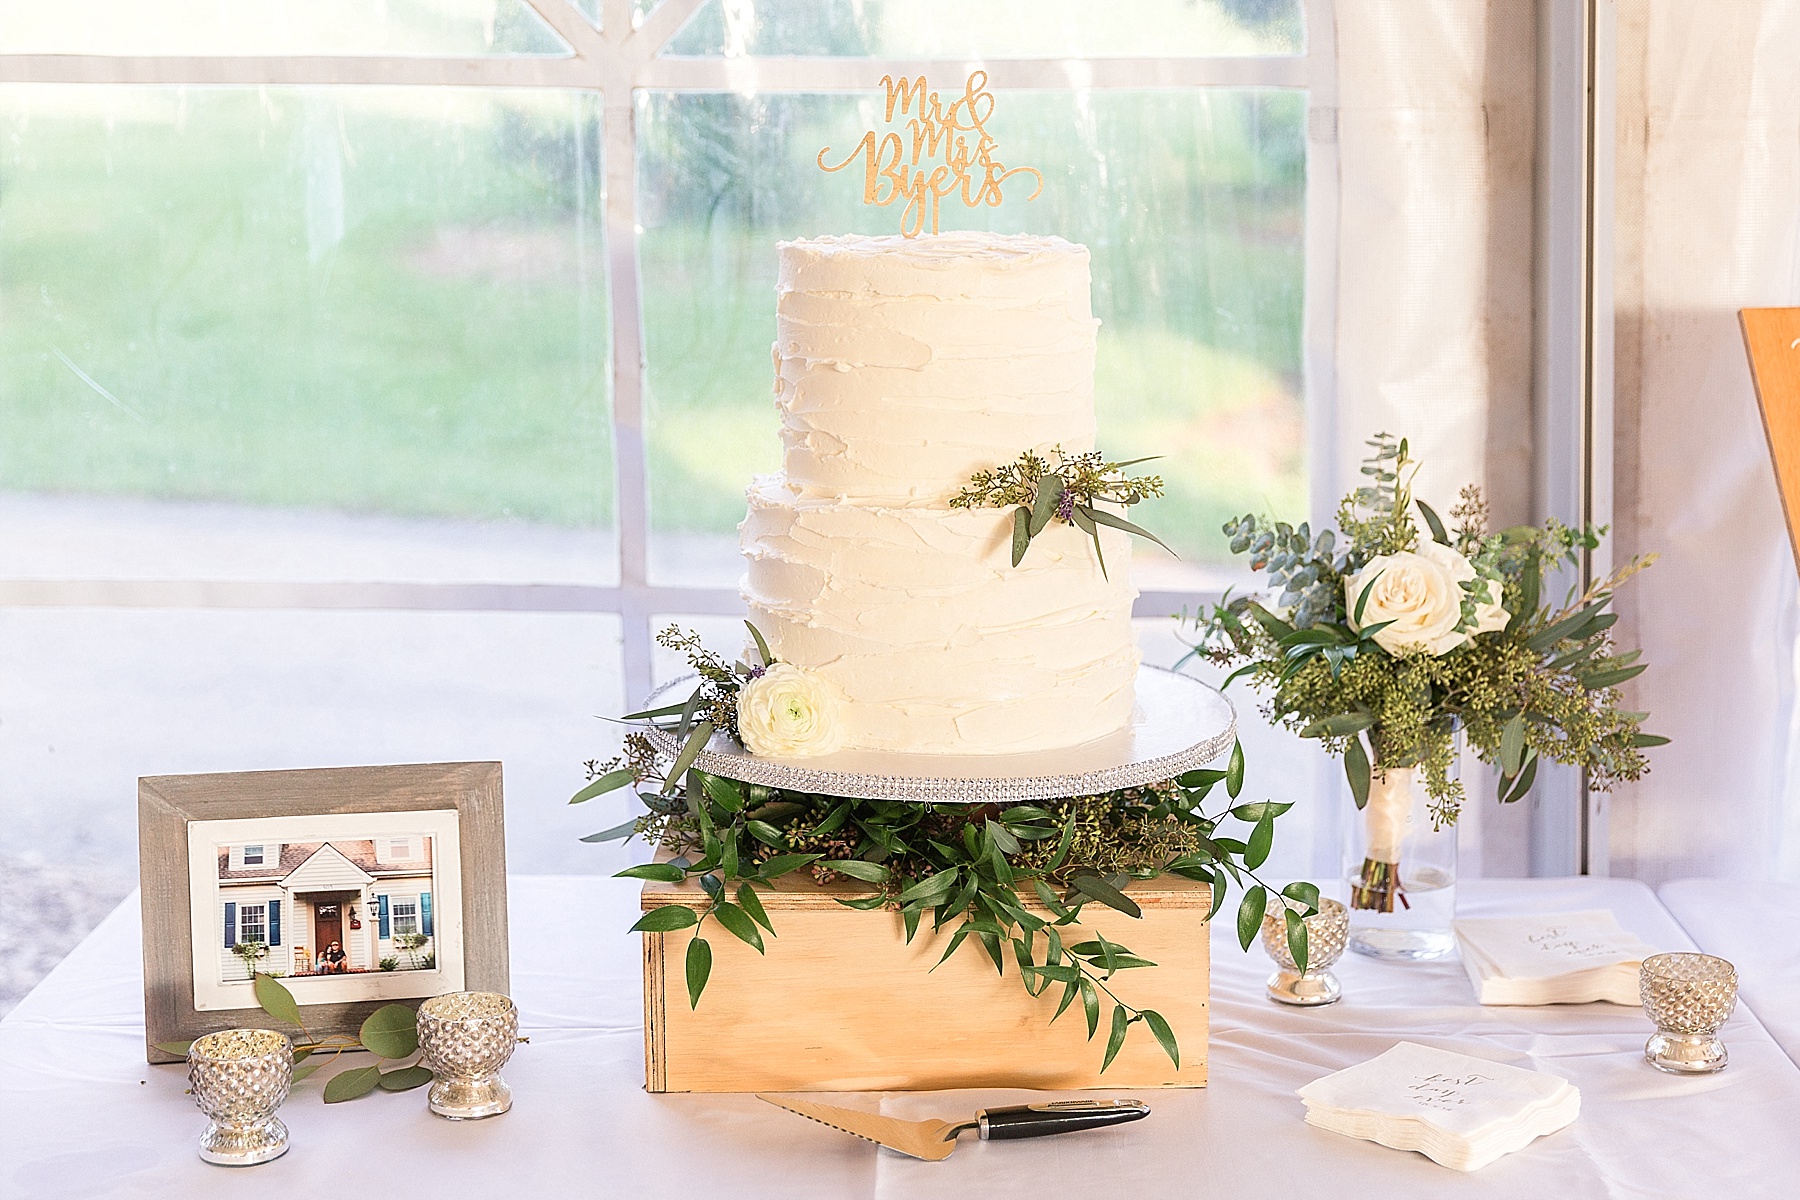 wedding cake by Designs by JoJo photographed by Alexandra Mandato Photography